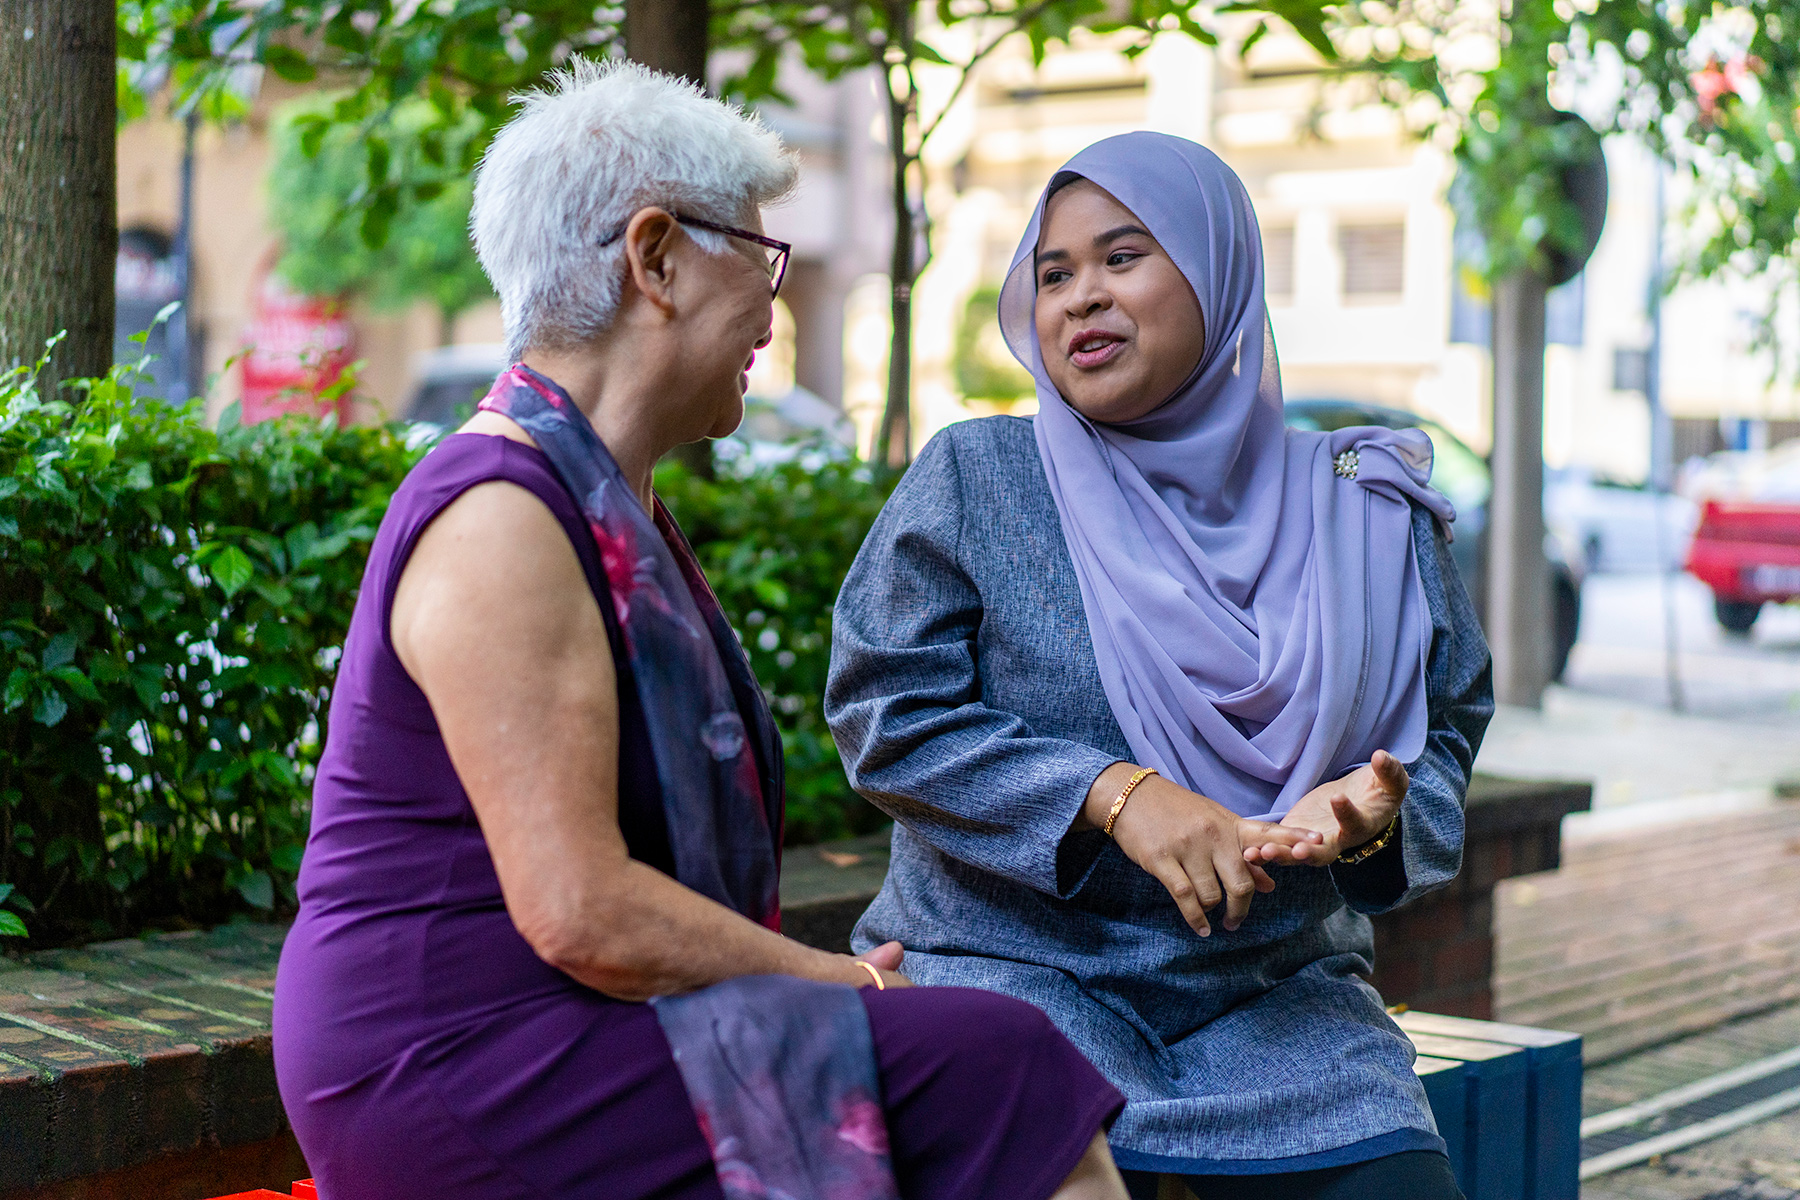 Two women chatting on a bench. One wearing a headscarf